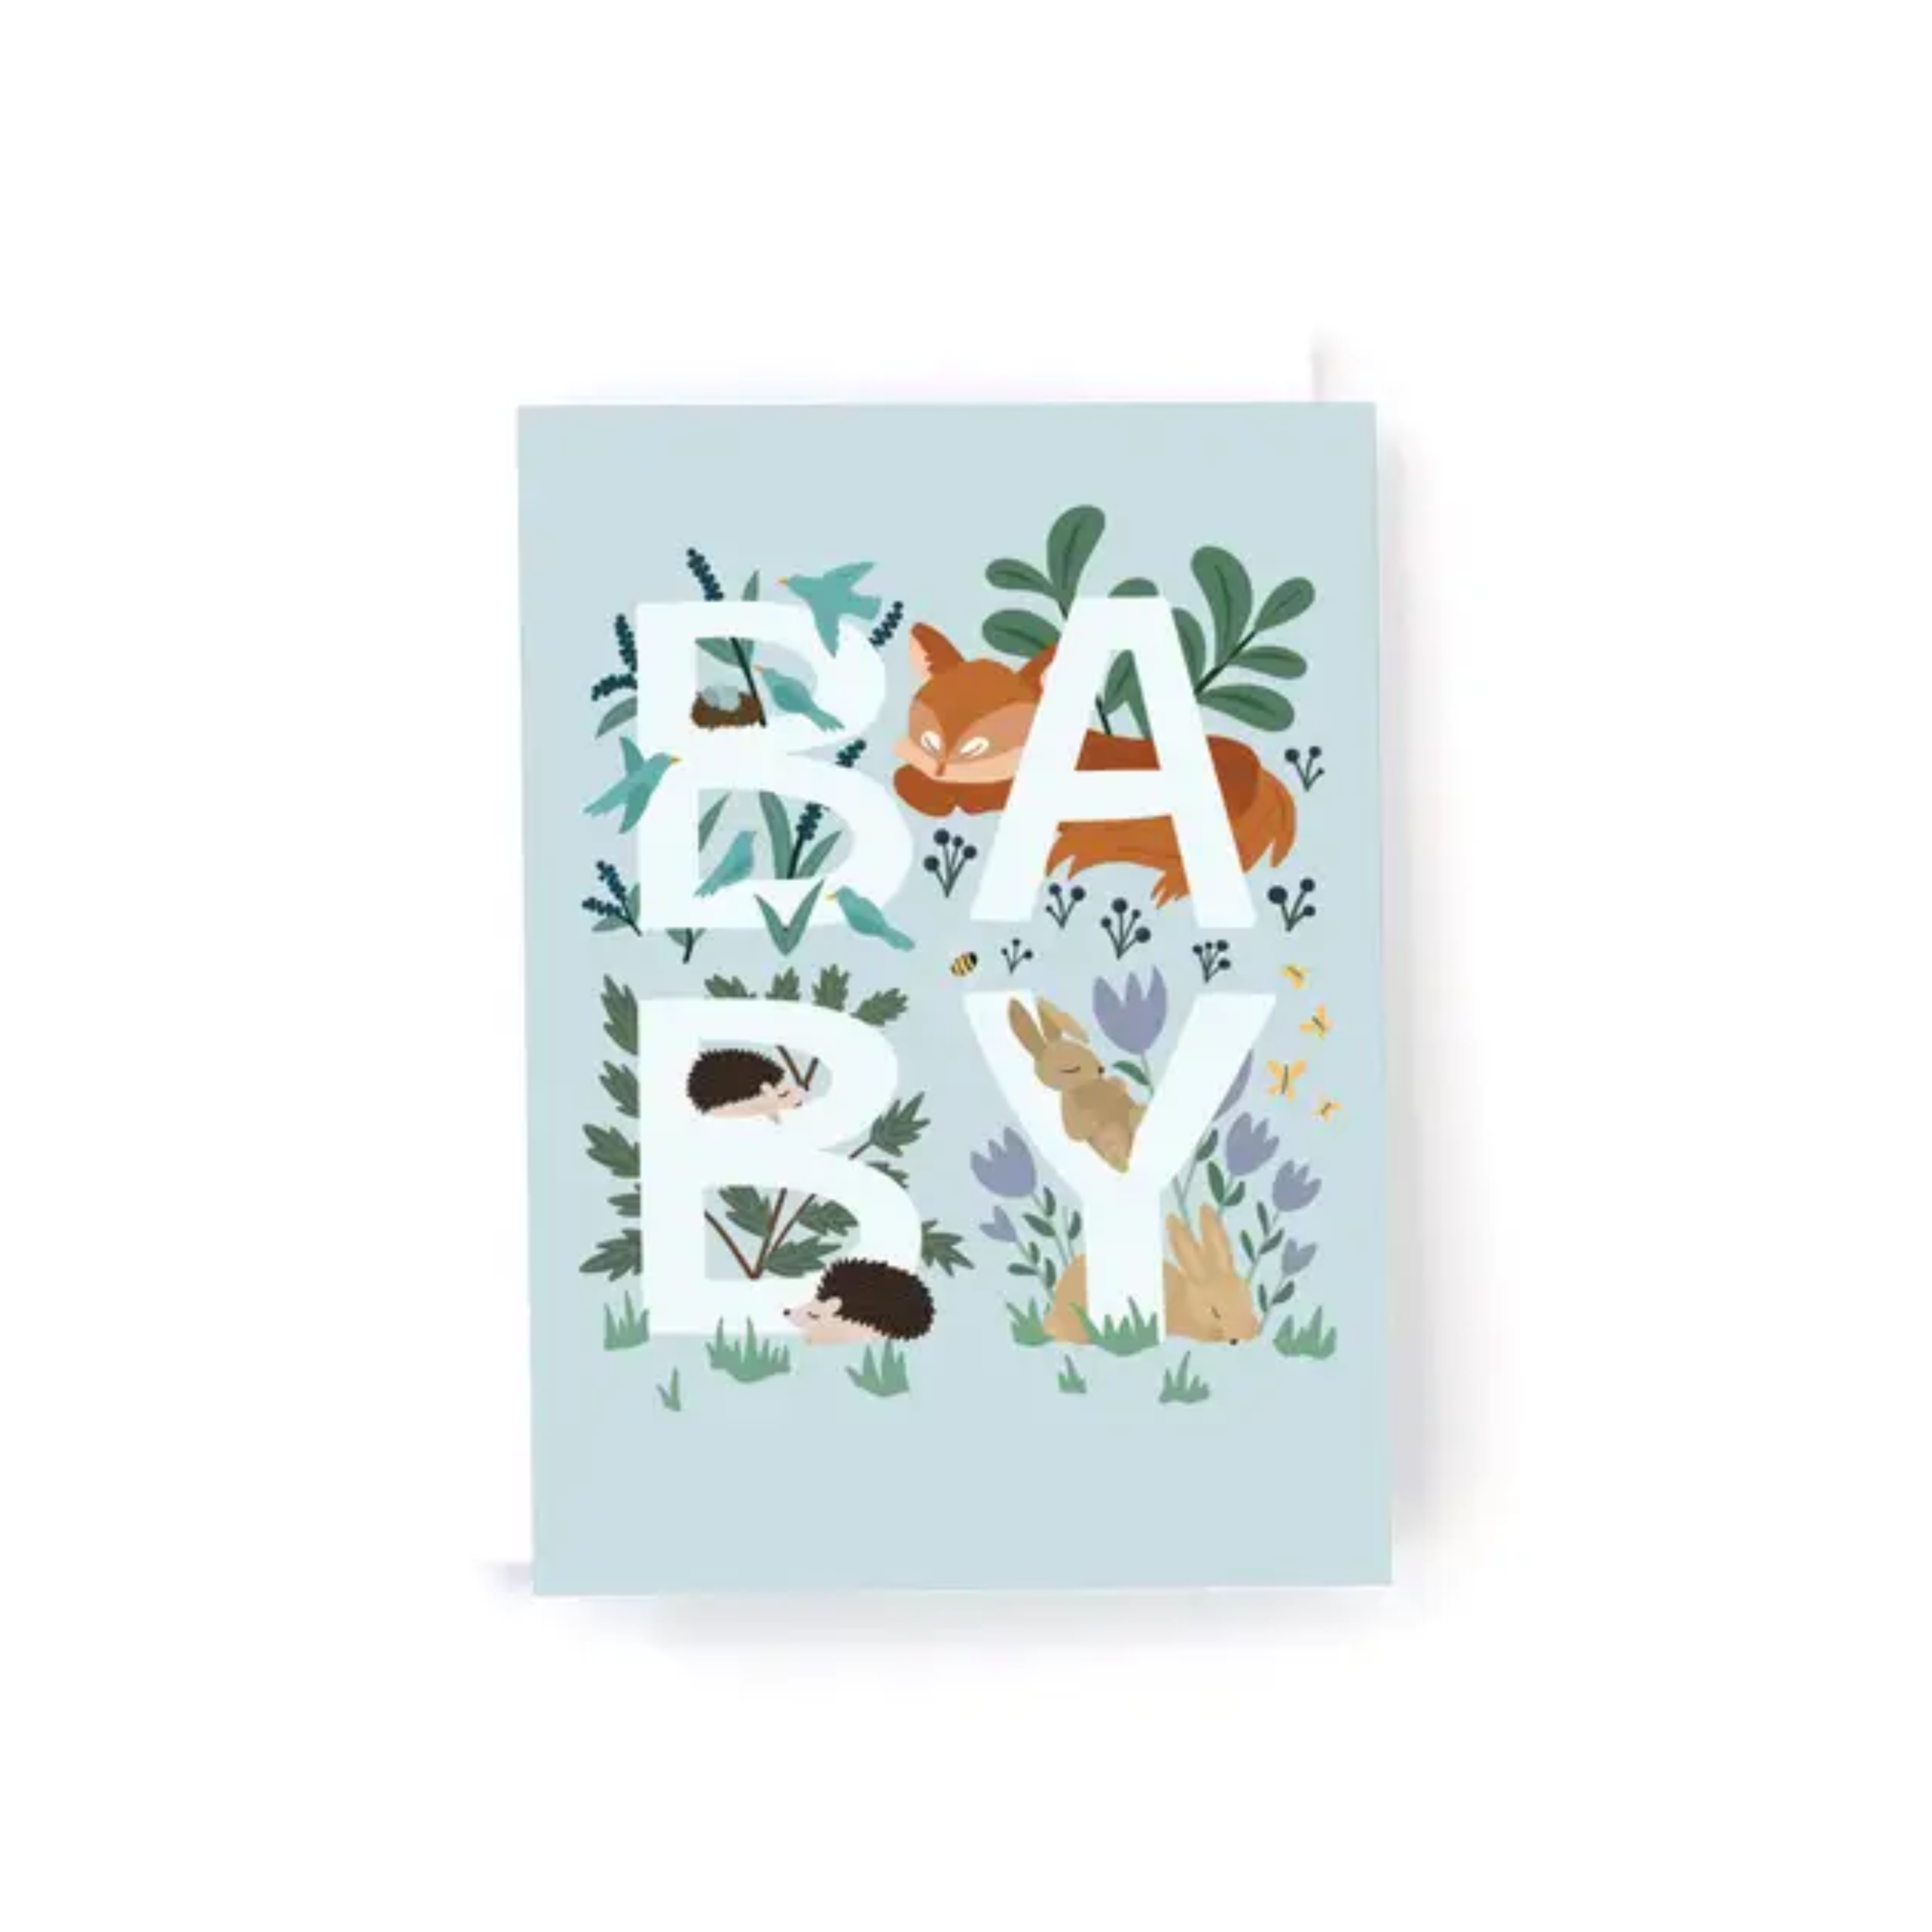 Pedaller Designs Woodland Baby (mini card)